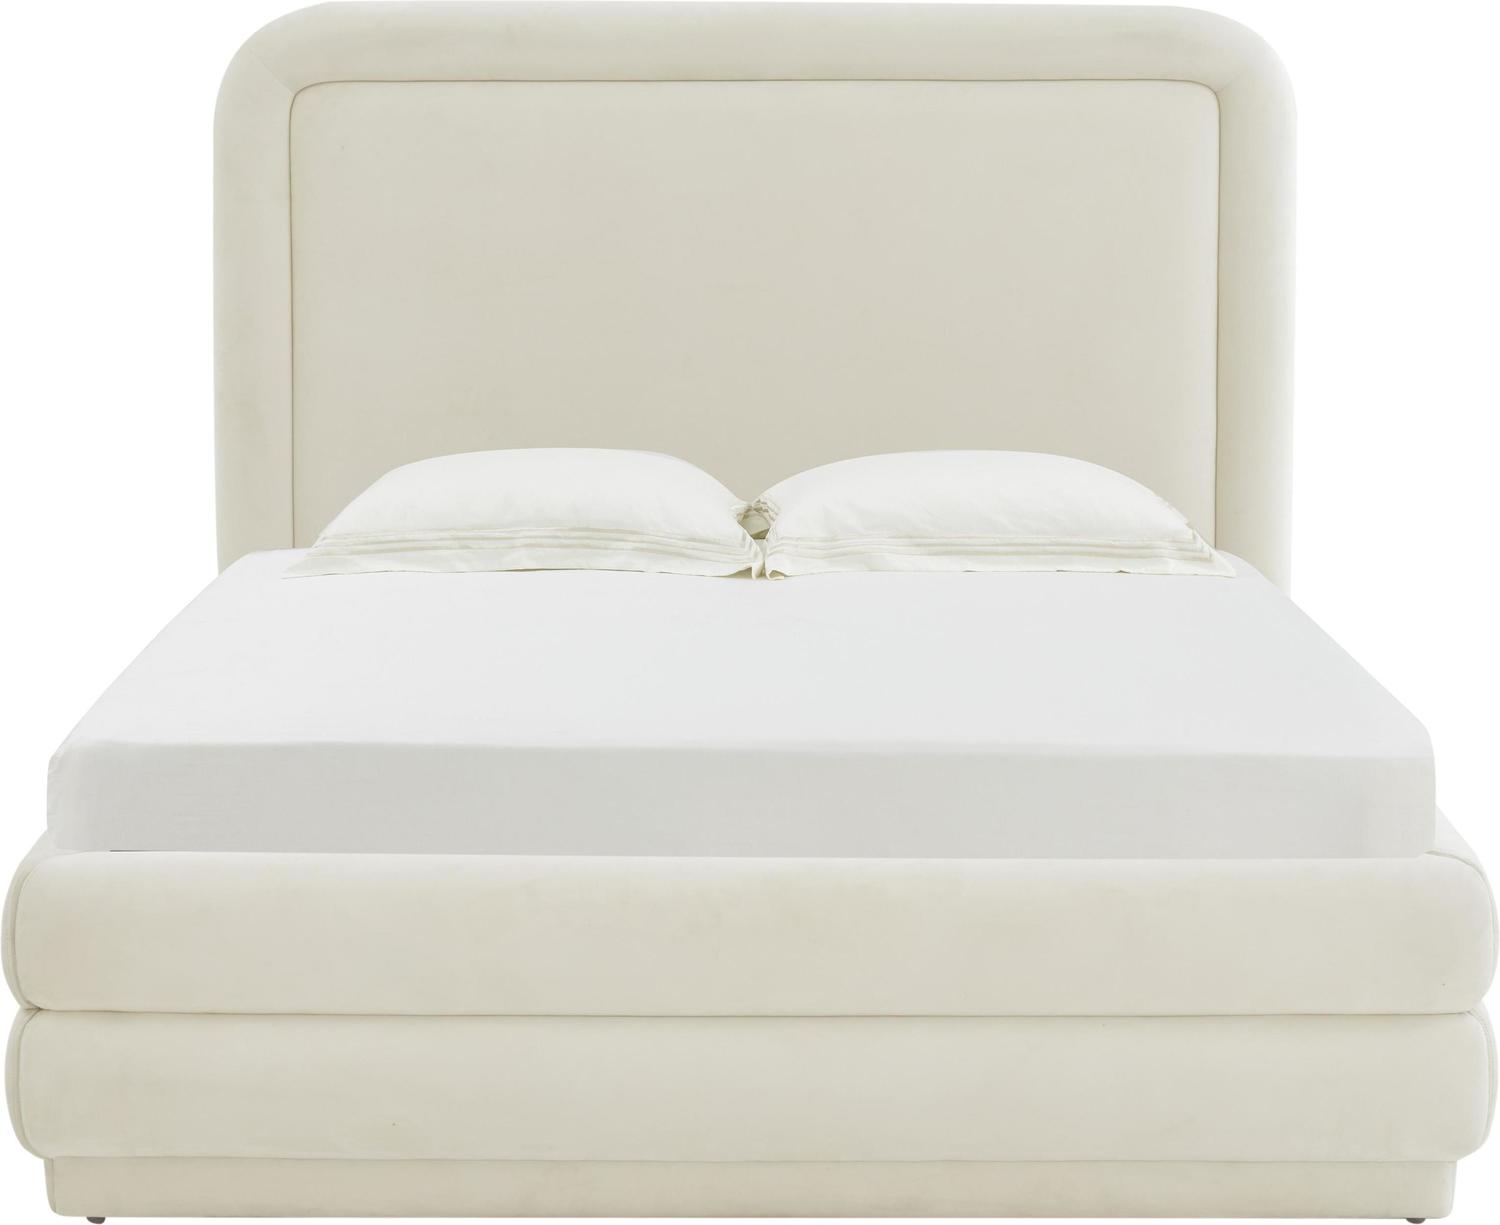 king size bed low headboard Contemporary Design Furniture Beds Cream